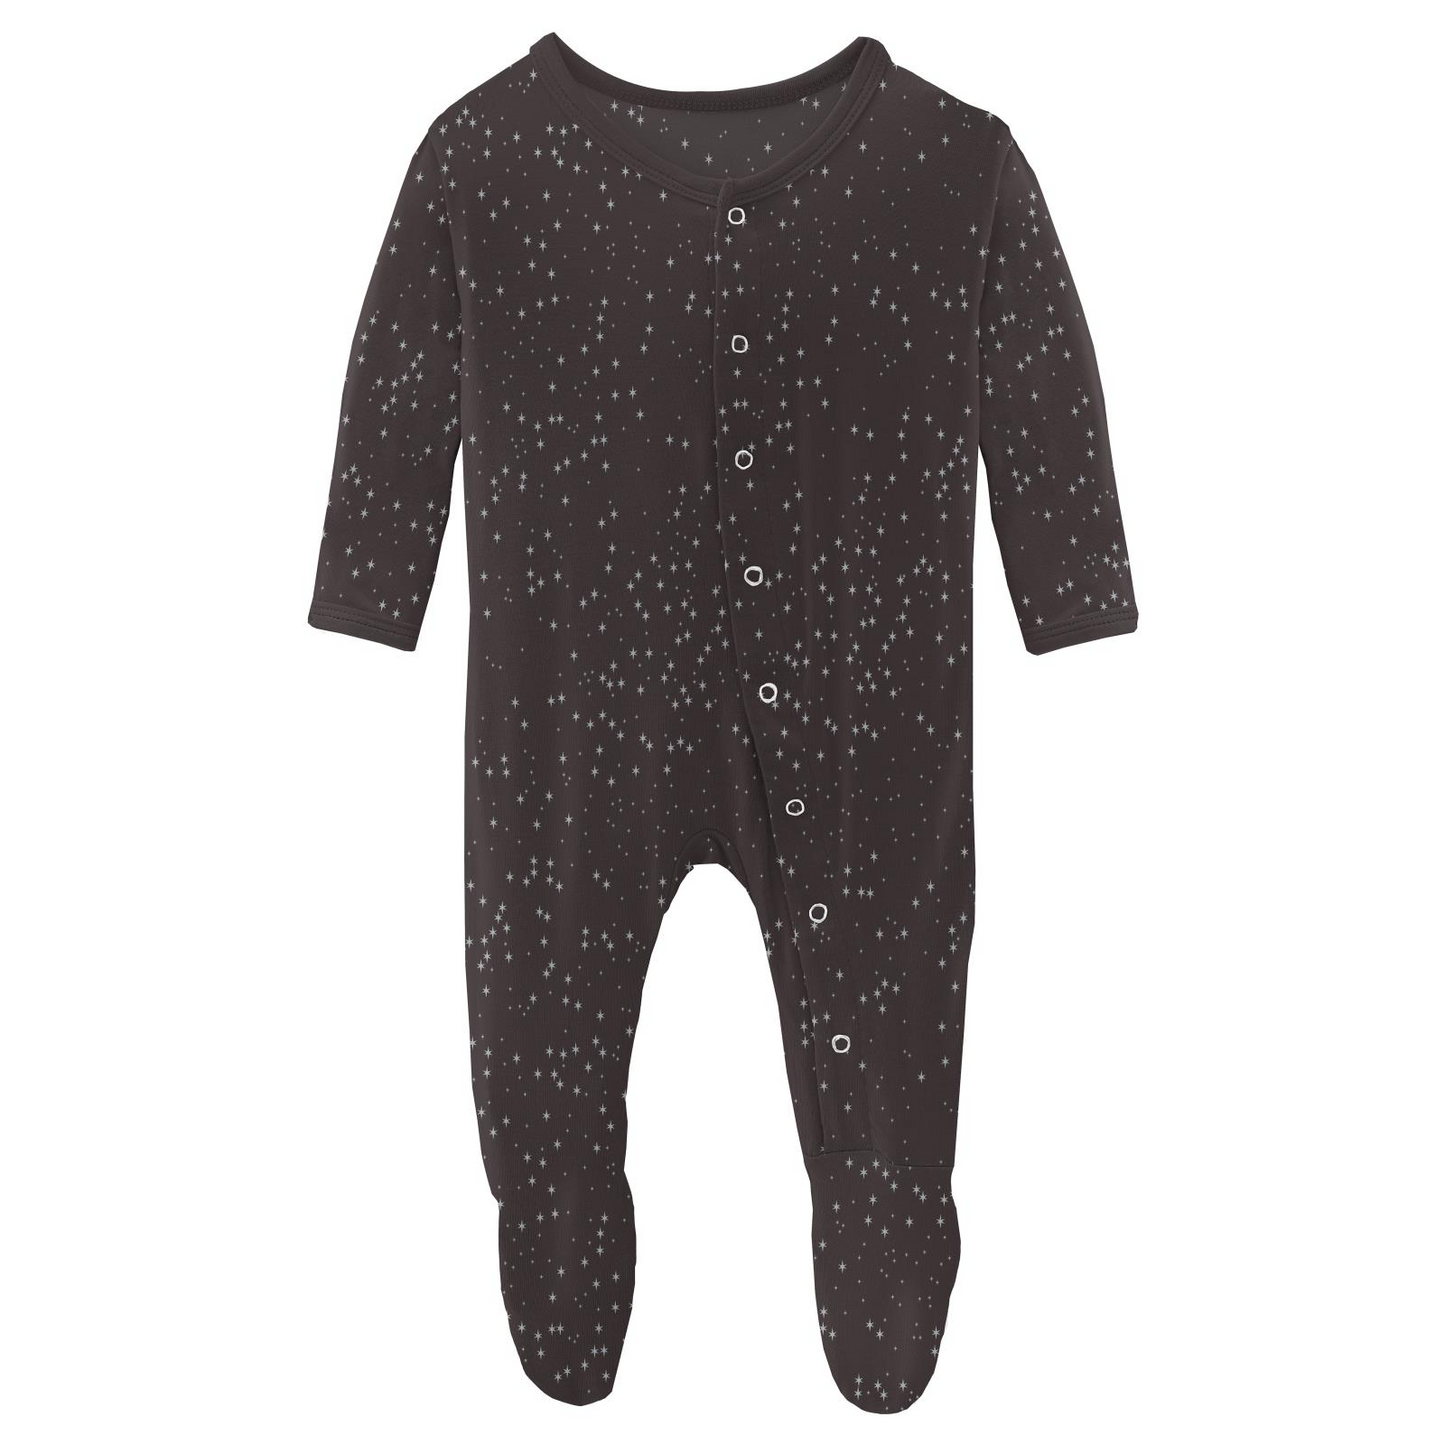 Kickee Pants Print Footie with Snaps: Midnight Foil Constellations